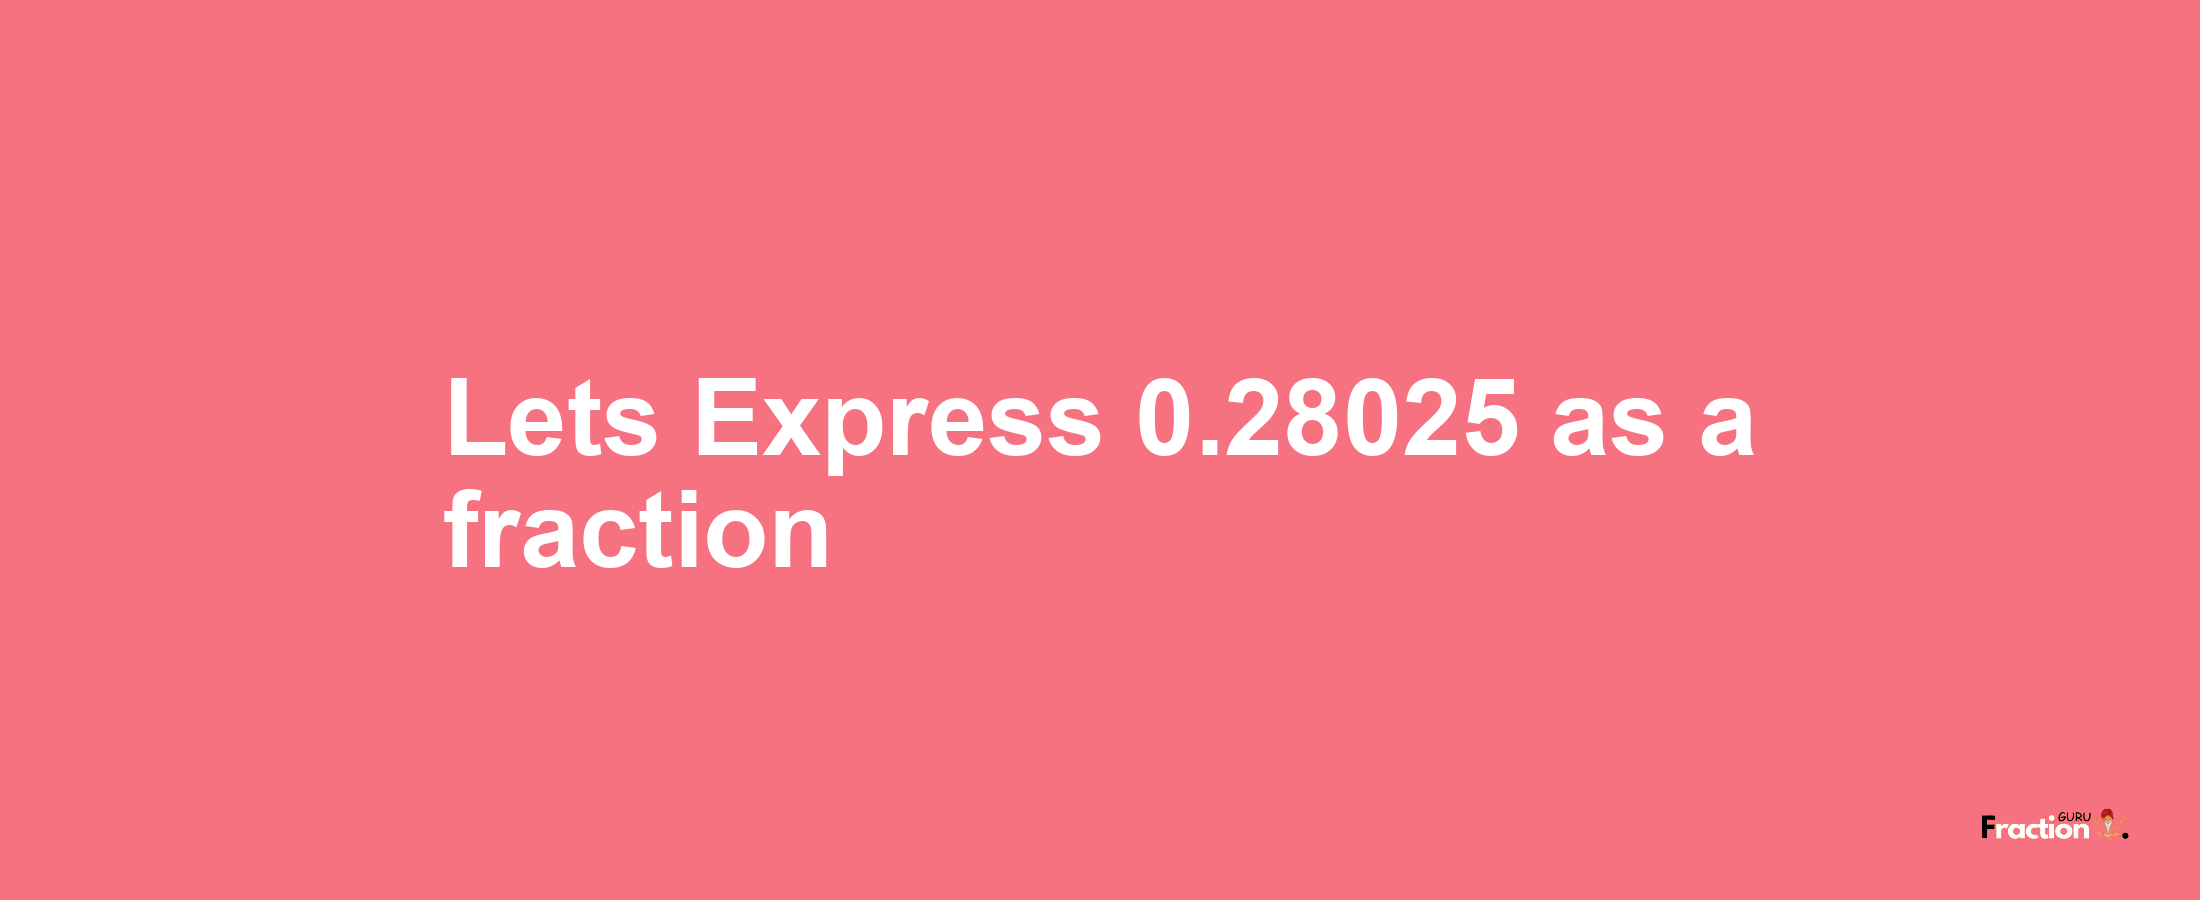 Lets Express 0.28025 as afraction